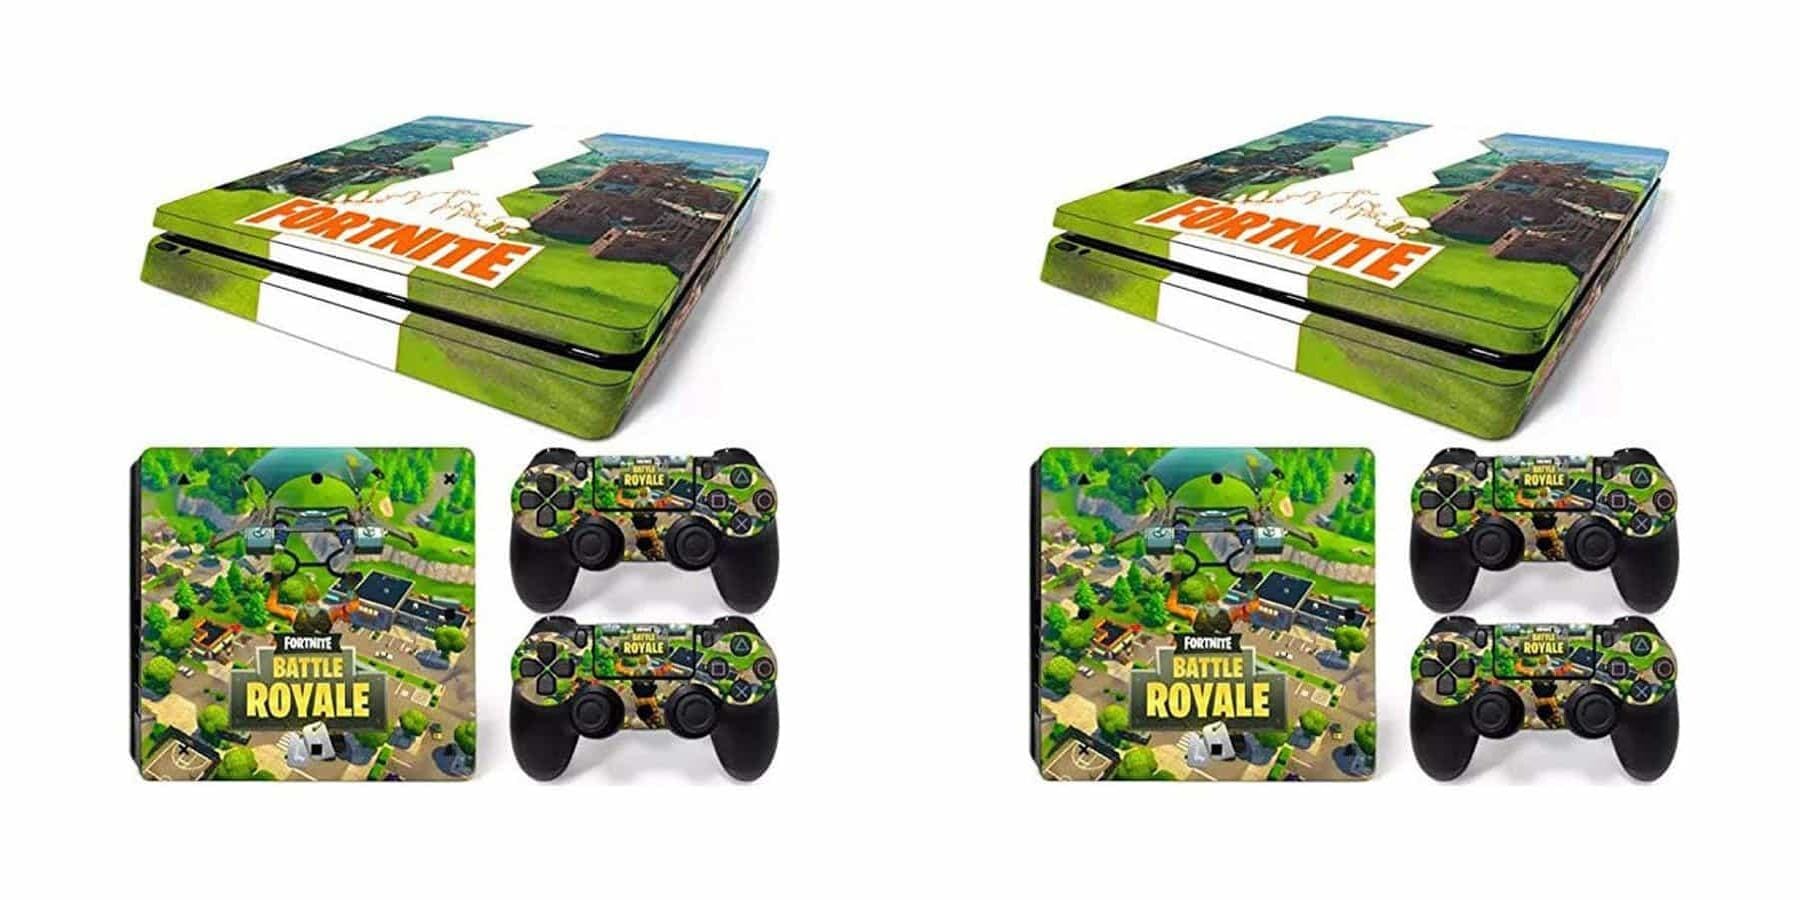 Set of 2 Fortnite Sticker for Sony PlayStation 4 Slim and Controllers - ST-CO-SE-1577